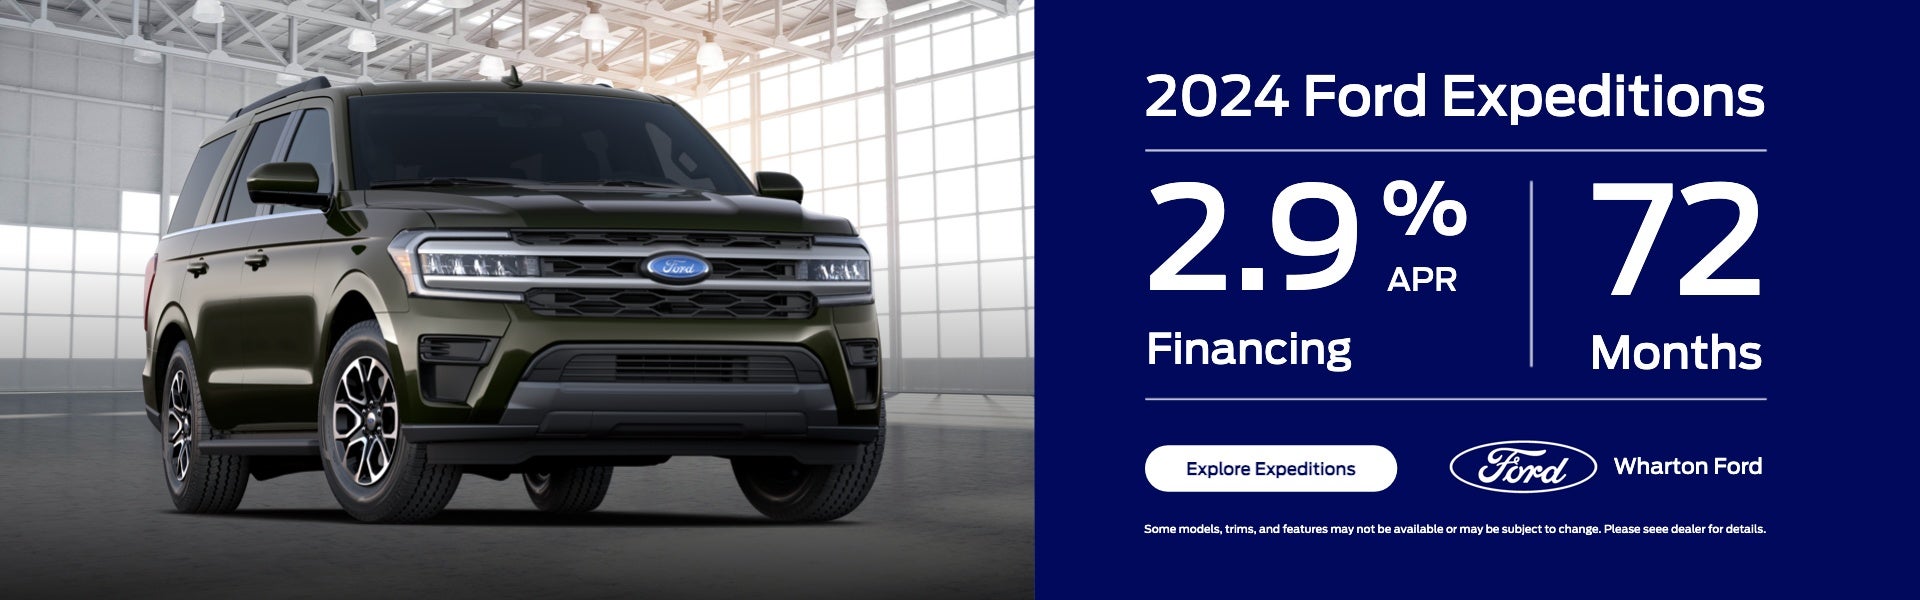 2024 Ford Expeditions